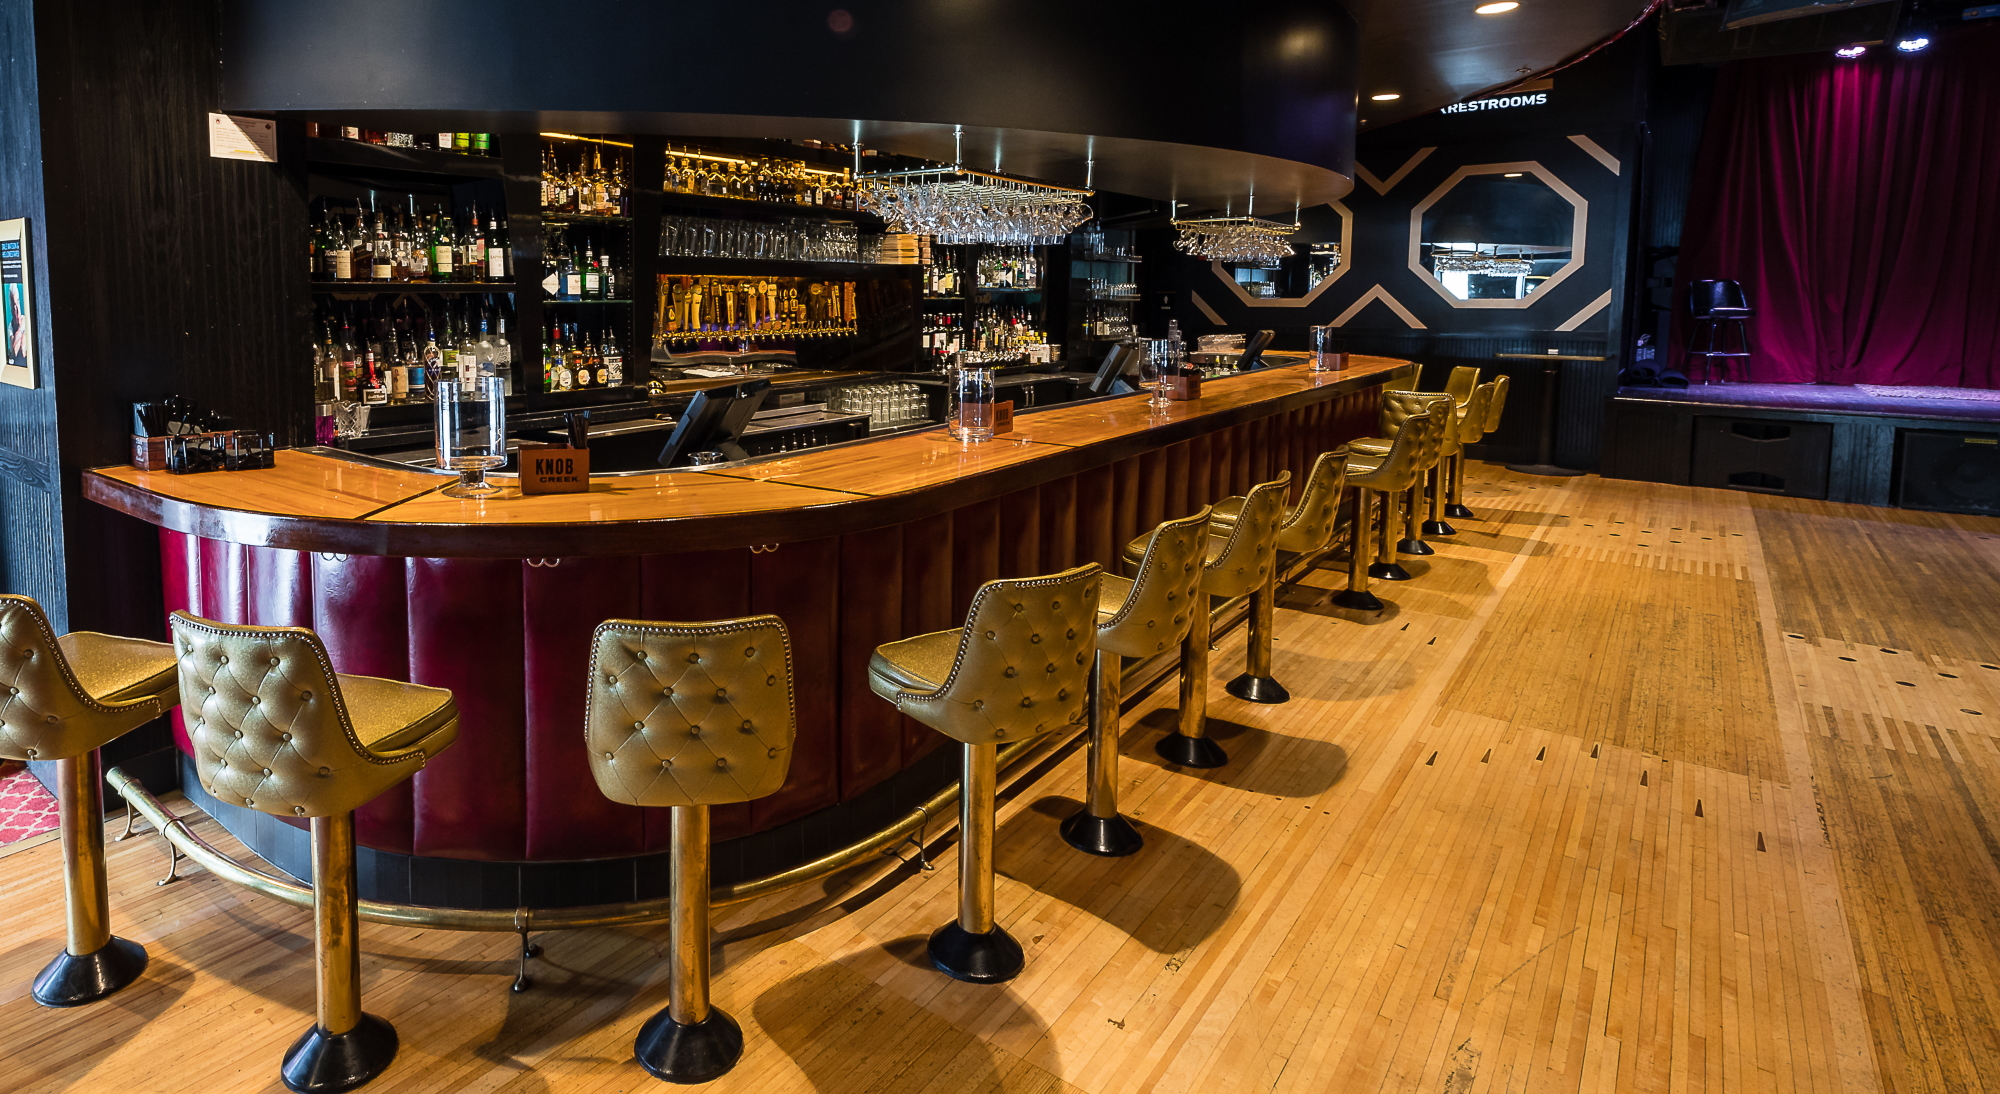 A bar with a glossed wooden countertop and a bar wall with red vinyl cushioning, surrounded by cushion gold bar seats. Behind the bar are various bottles of liquors, spirits and mixers. Behind the bar's seating, to the right, is a wooden dancefloor with bowling lane markers in some spots.